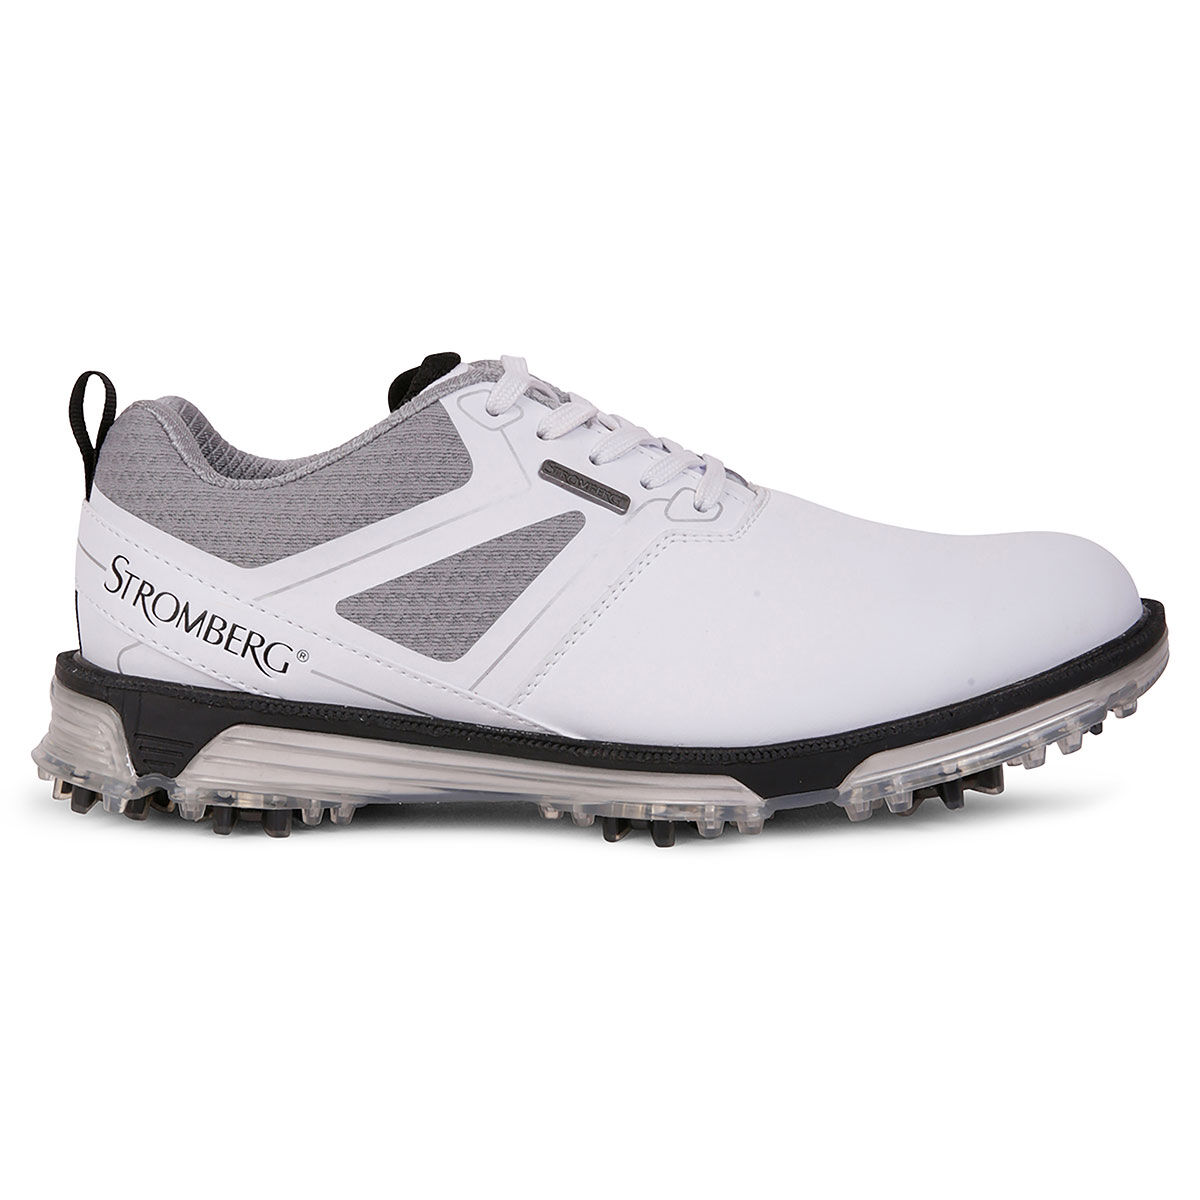 Stromberg Men’s Tour Classic Waterproof Spiked Golf Shoes, Mens, White, 8 | American Golf